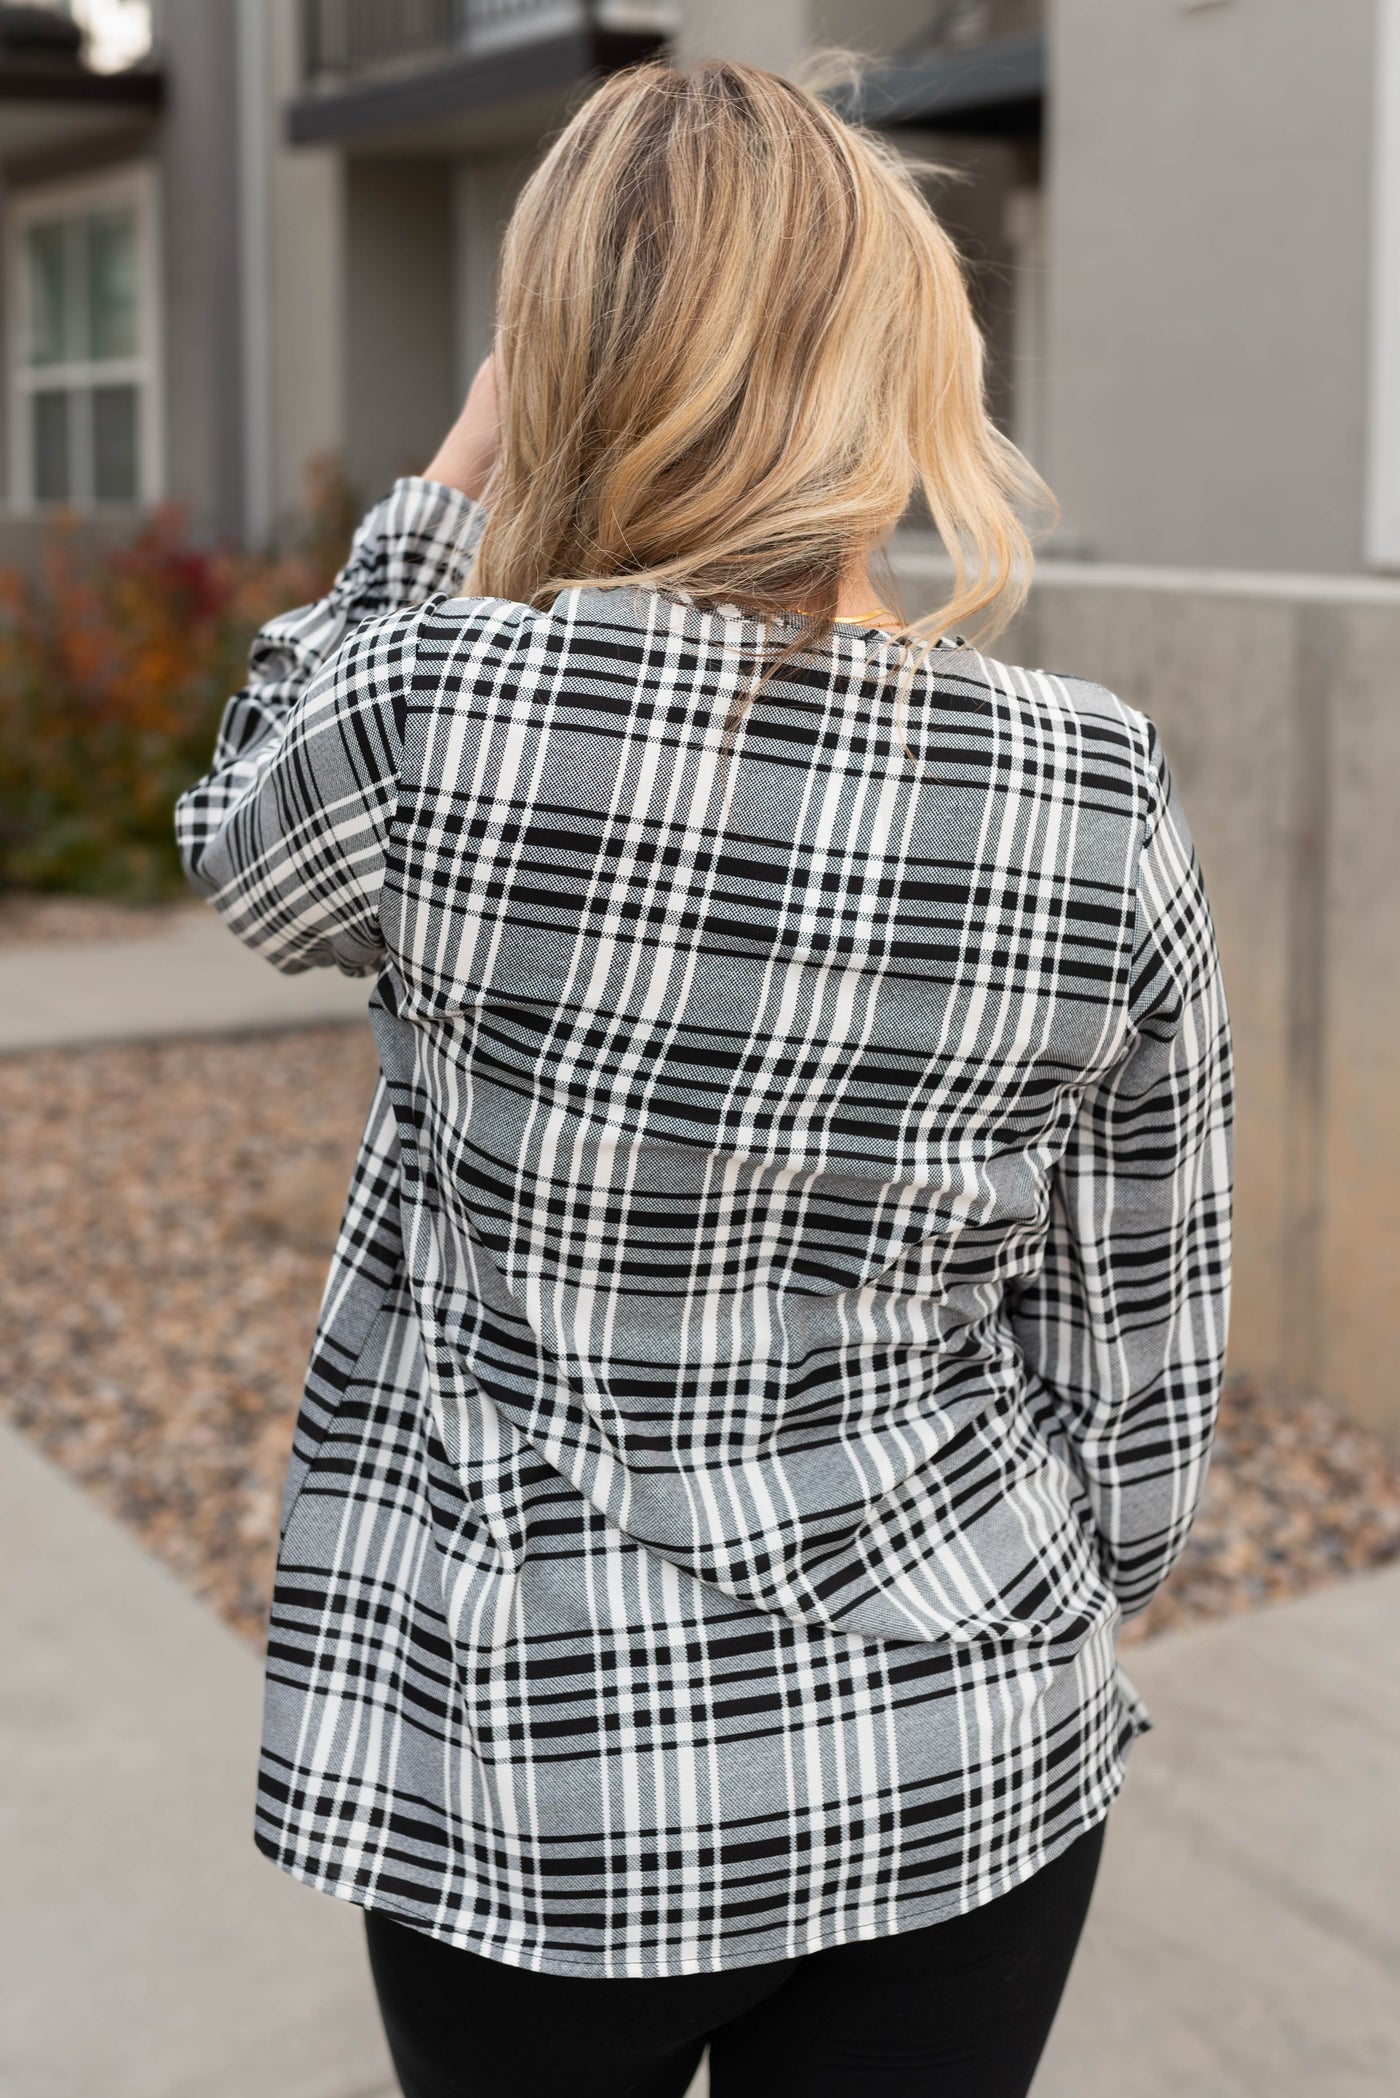 Back view of the black plaid blouse